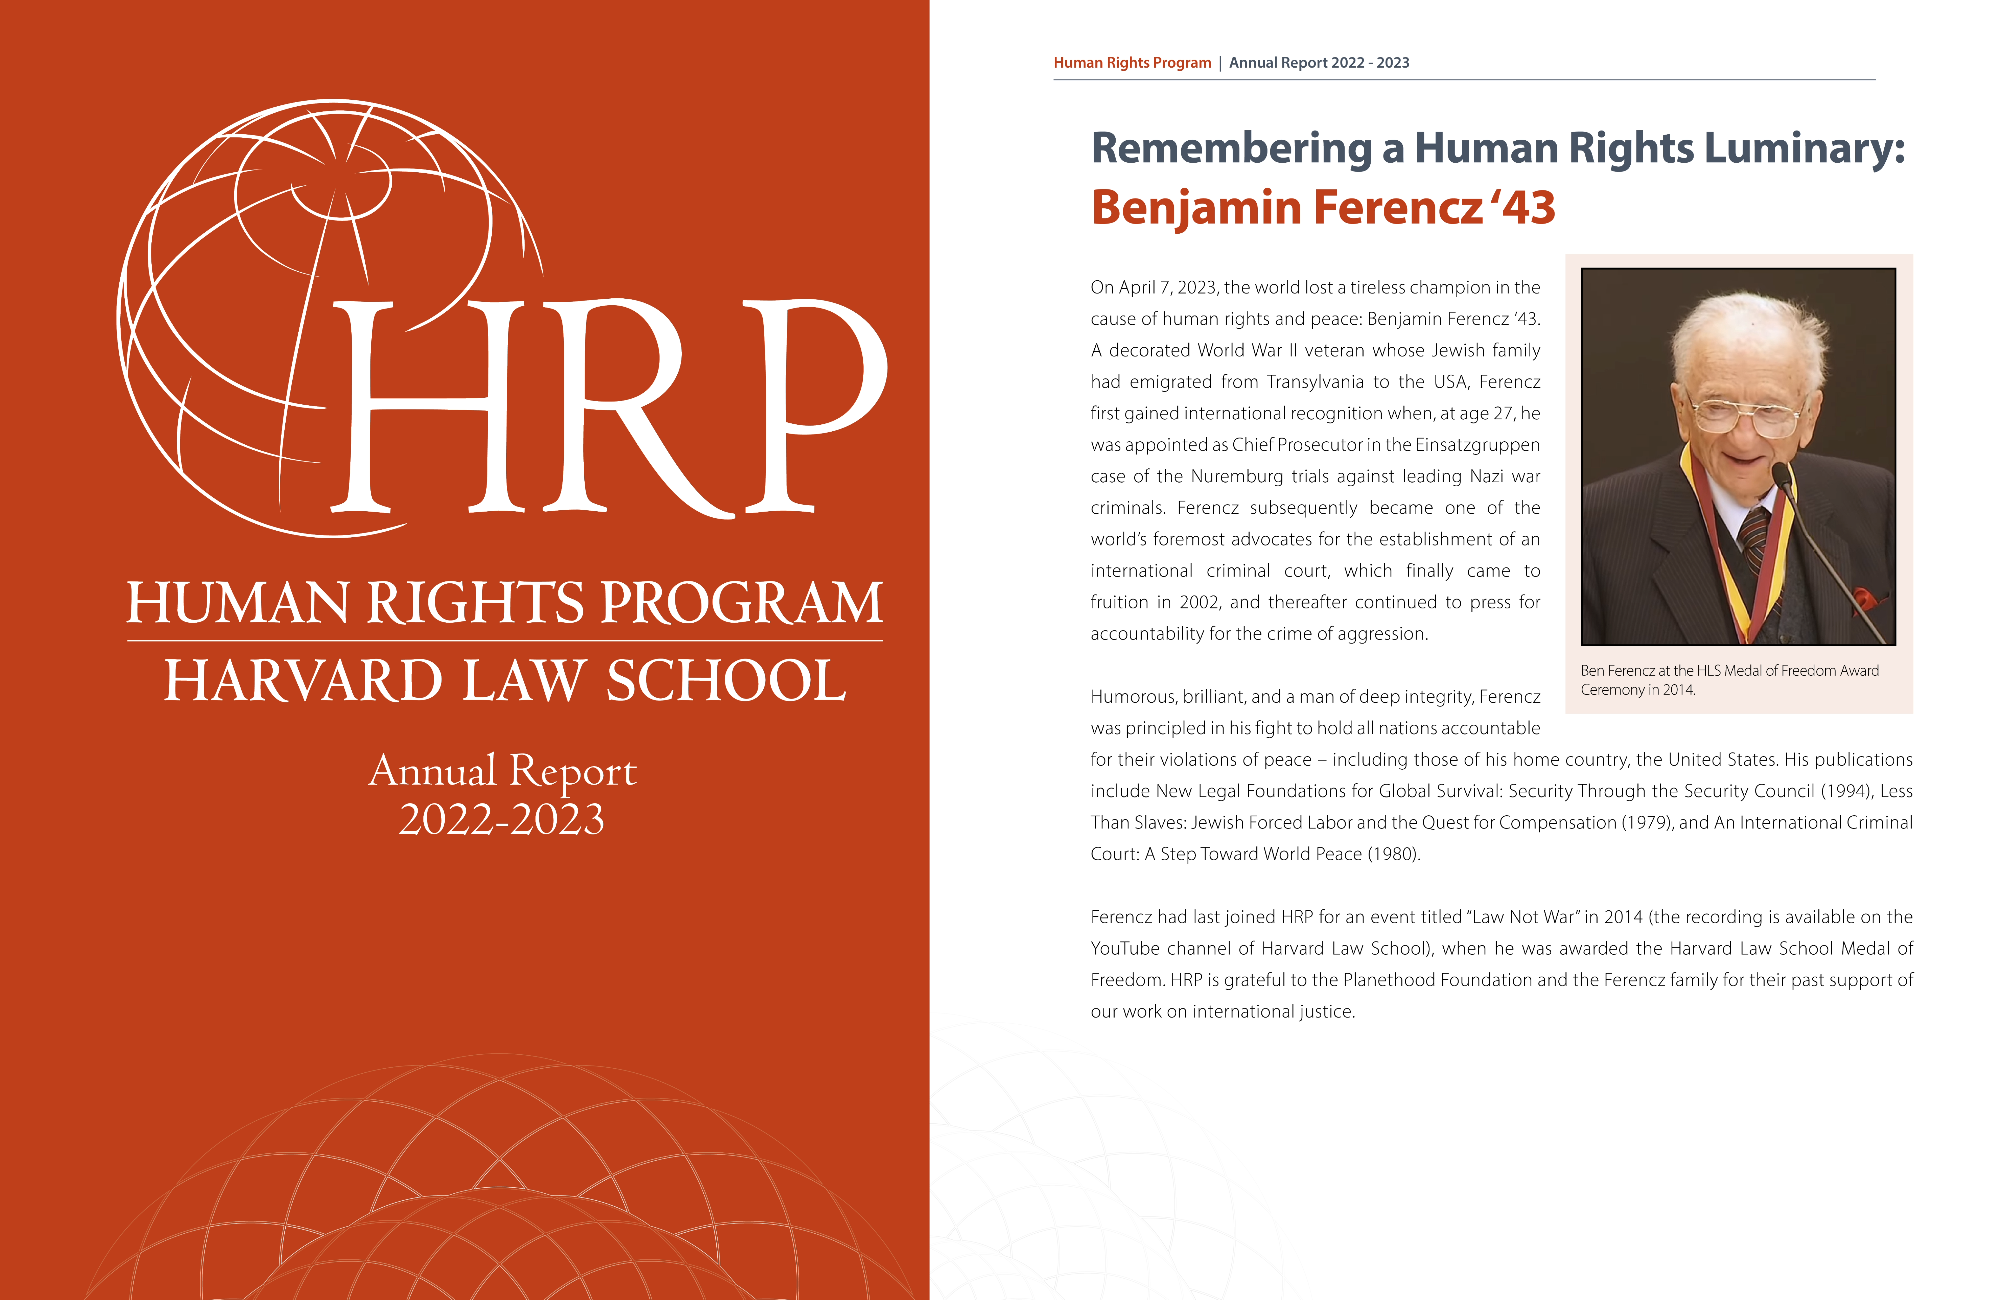 HRP’s 2022-2023 Annual Report